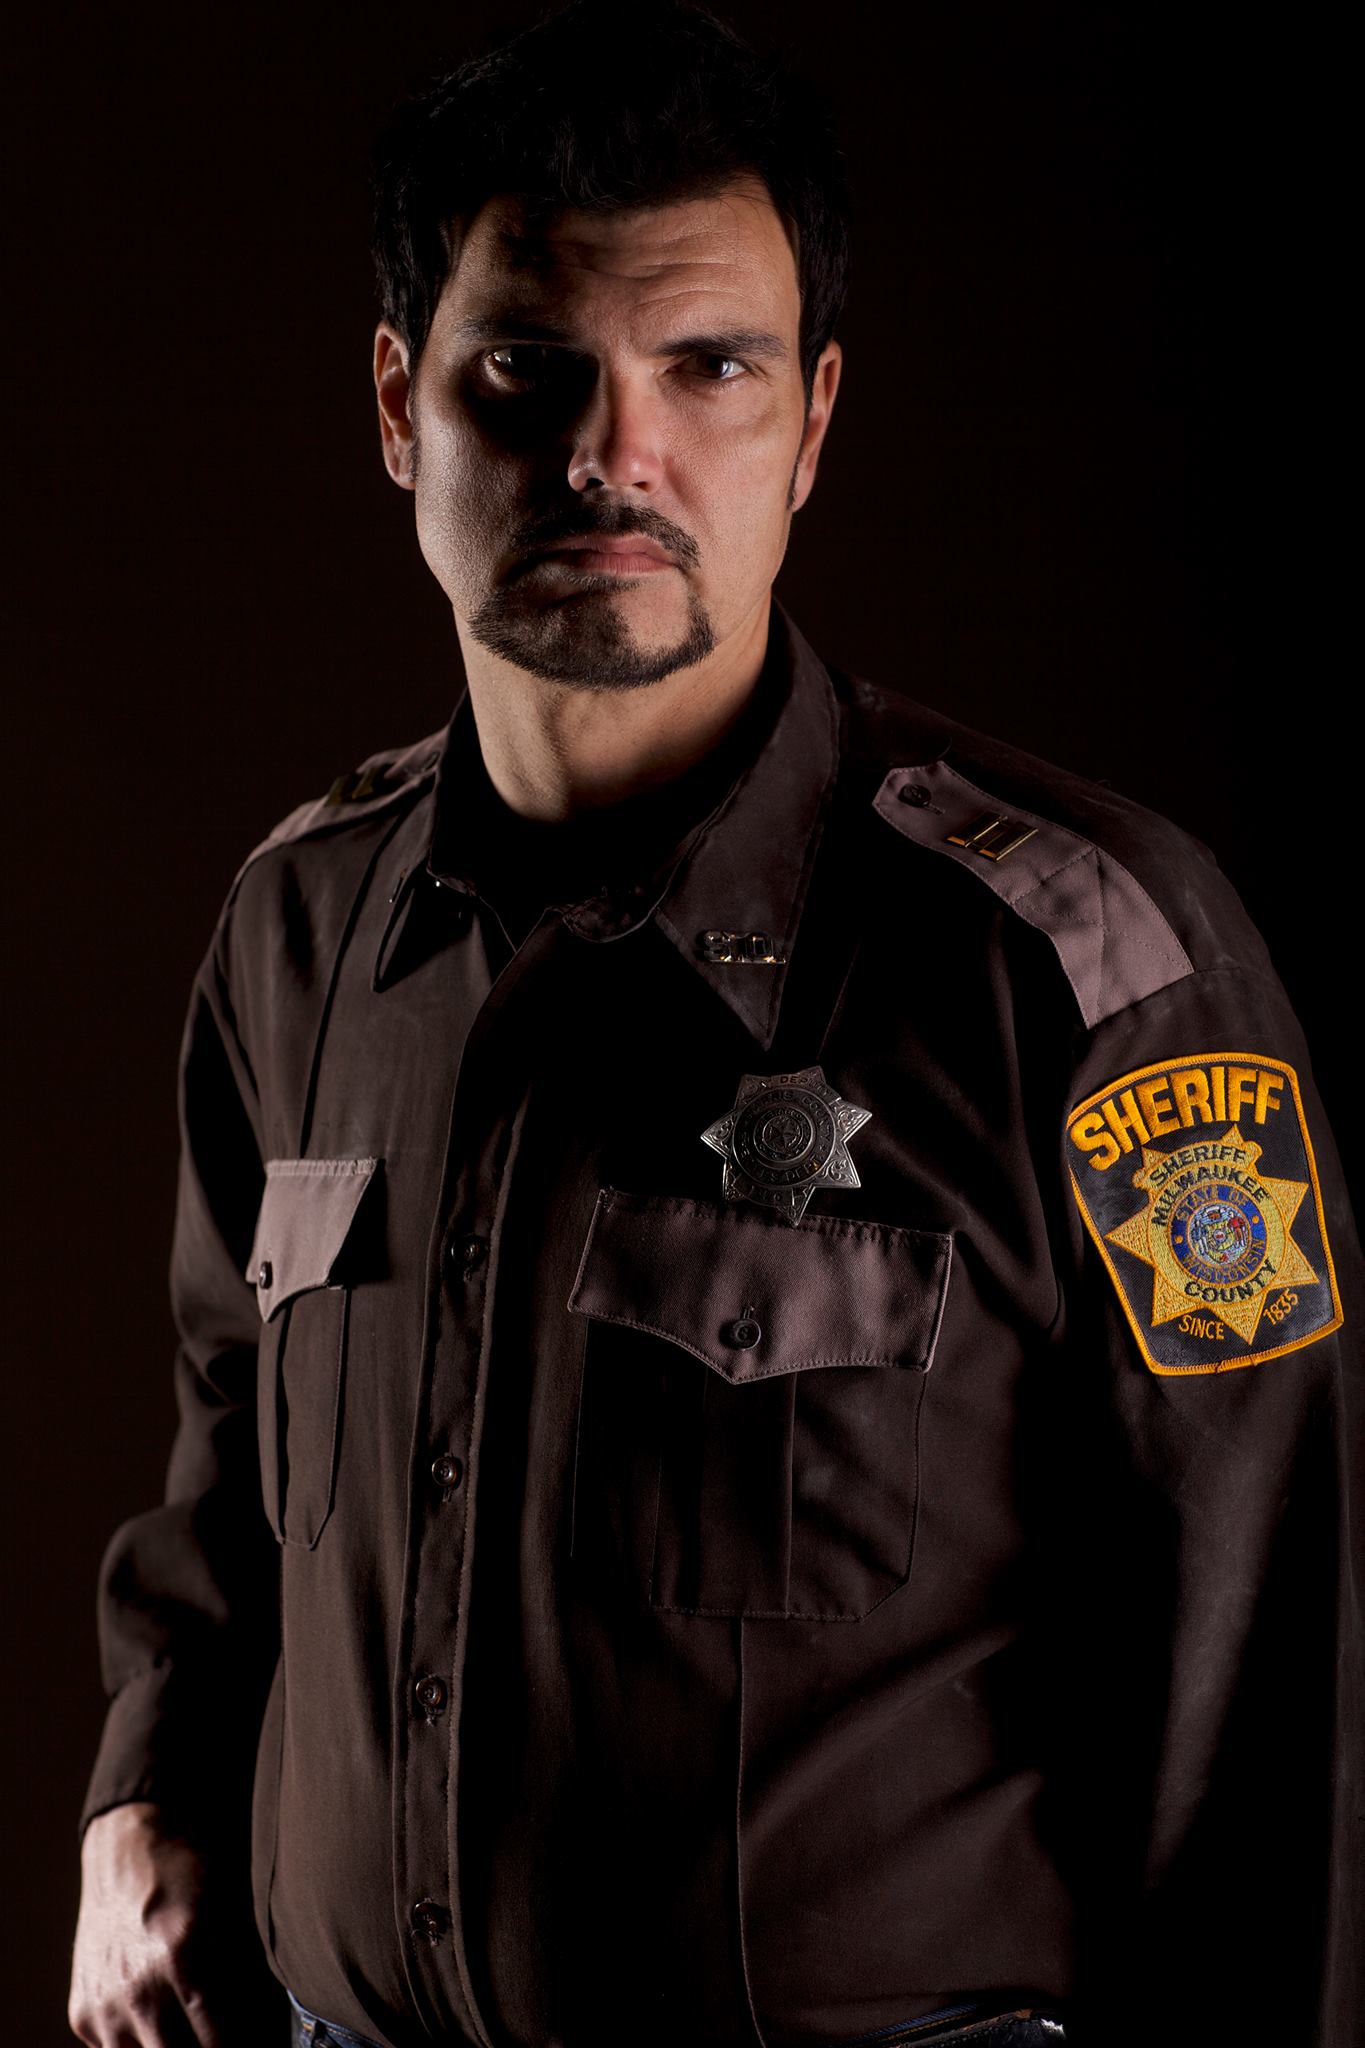 Larry Wade Carrell as Sheriff McElroy